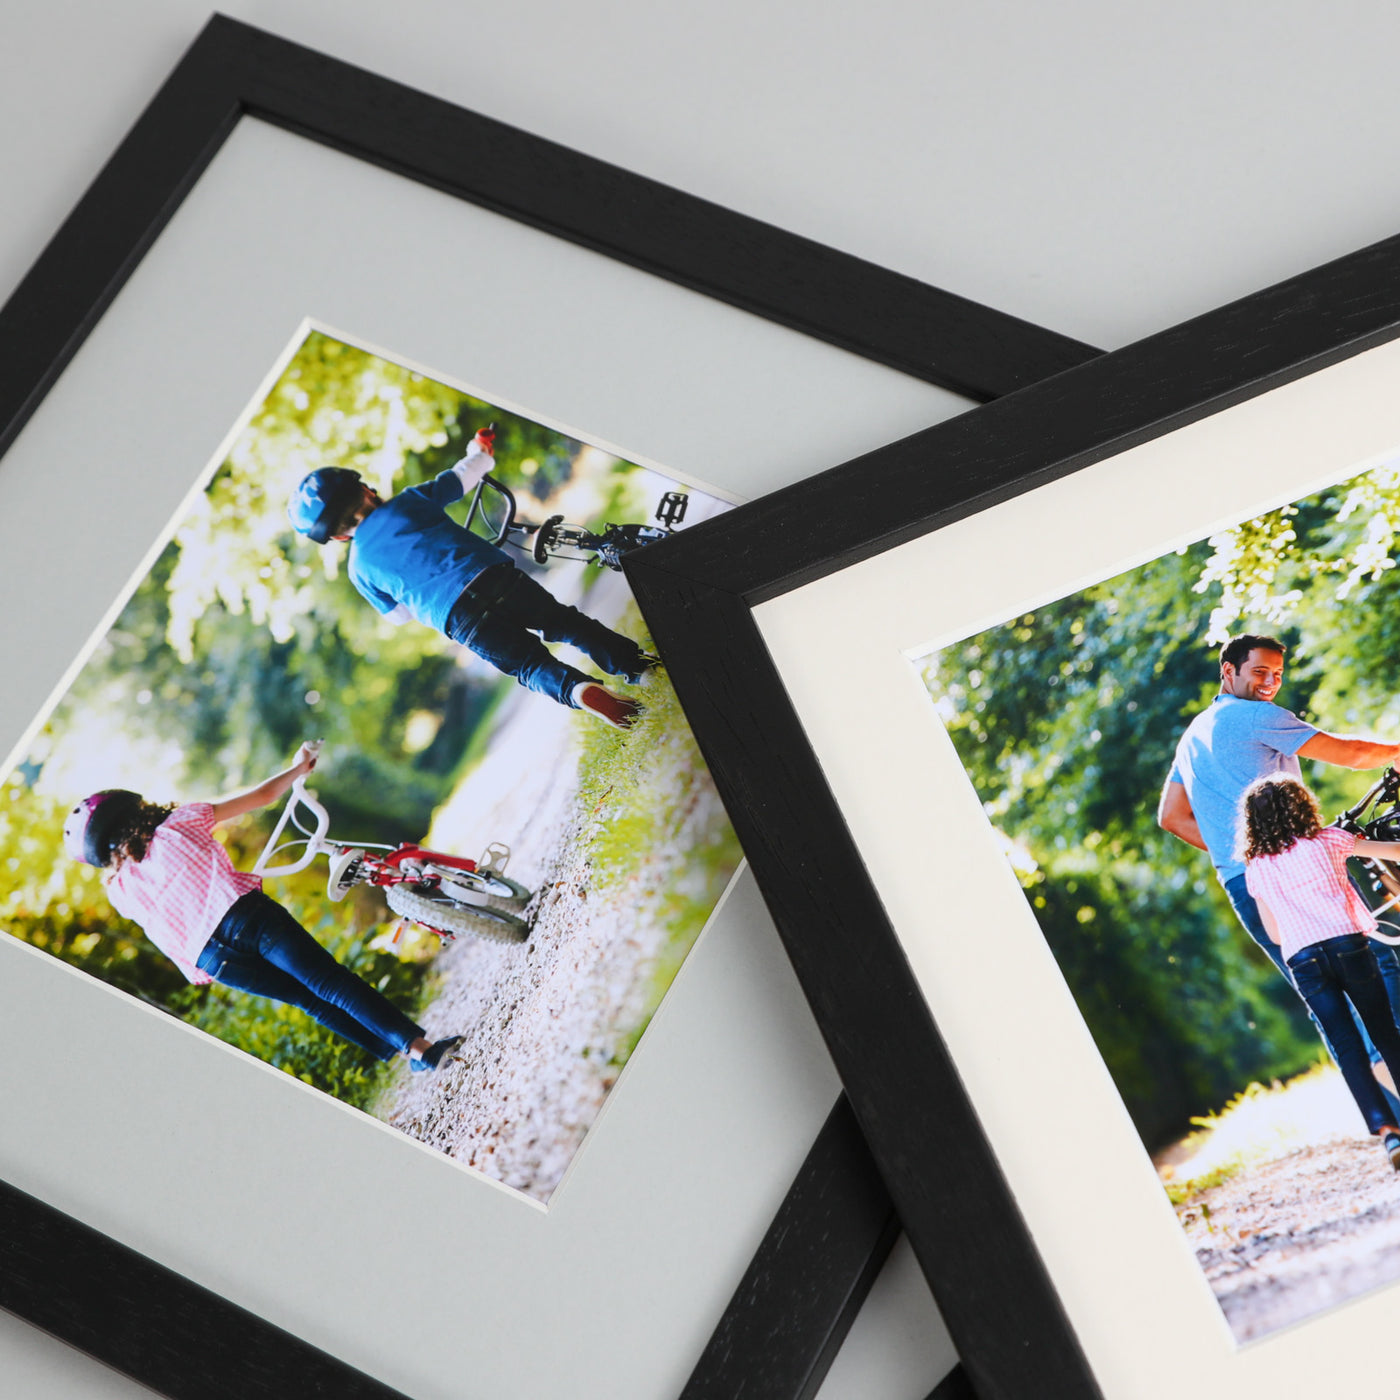 40x30cm Classic Black Picture Frame with a 30x20cm Mount